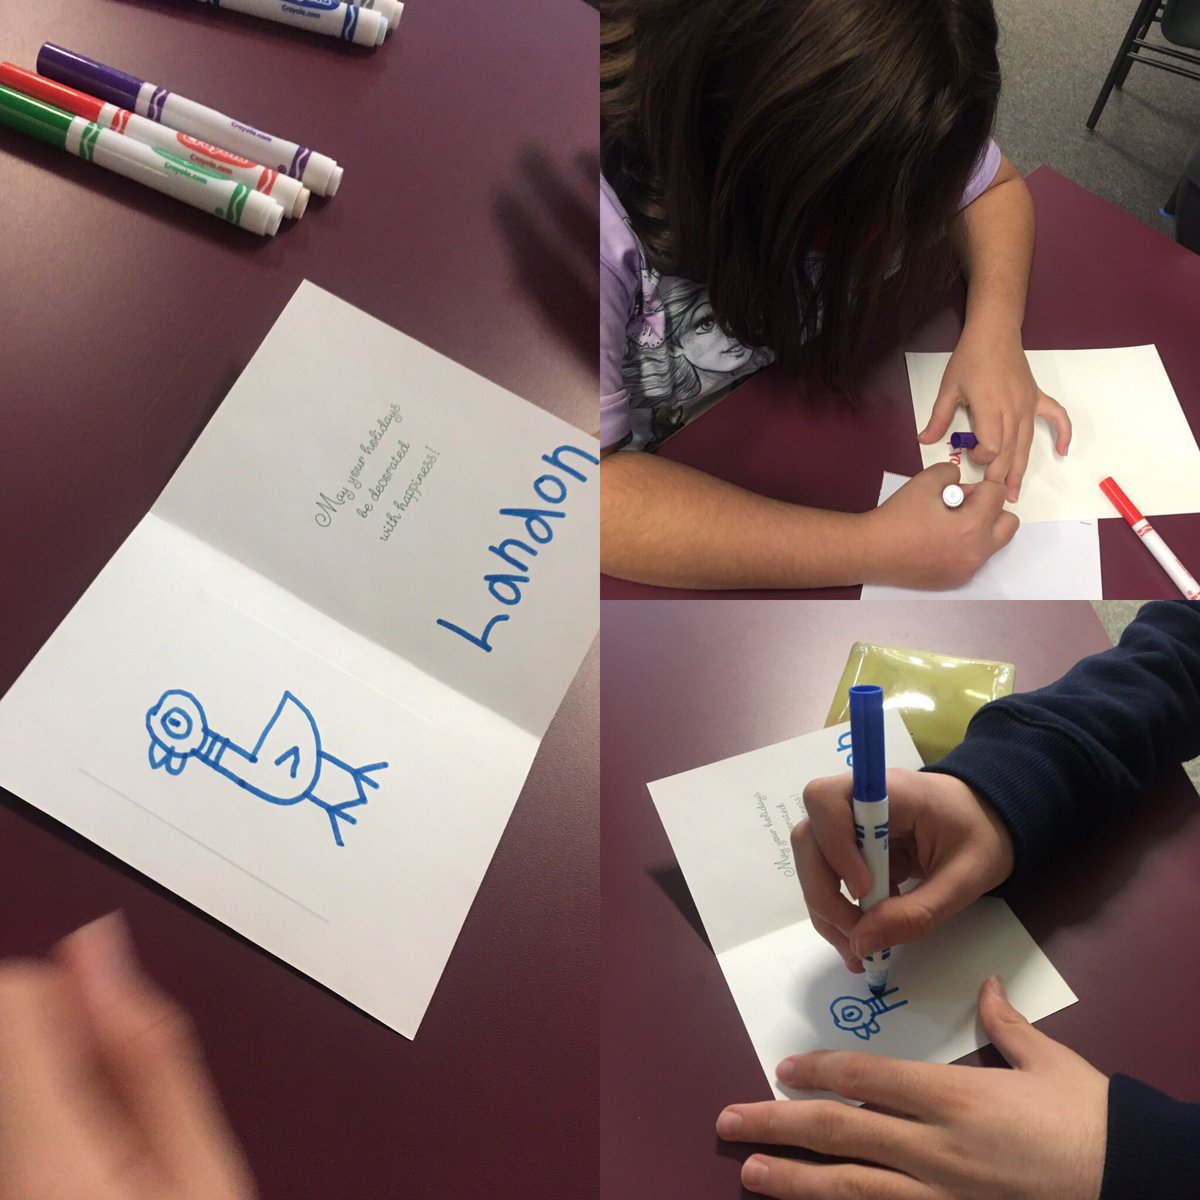 Have a wonderful #ThanksgivingBreak friends! We’ve enjoyed #MakingCards for soldiers in Kuwait, making #HandTurkeys, racing feathers & playing feather air hockey and wearing our crazy hats! See you on Monday!